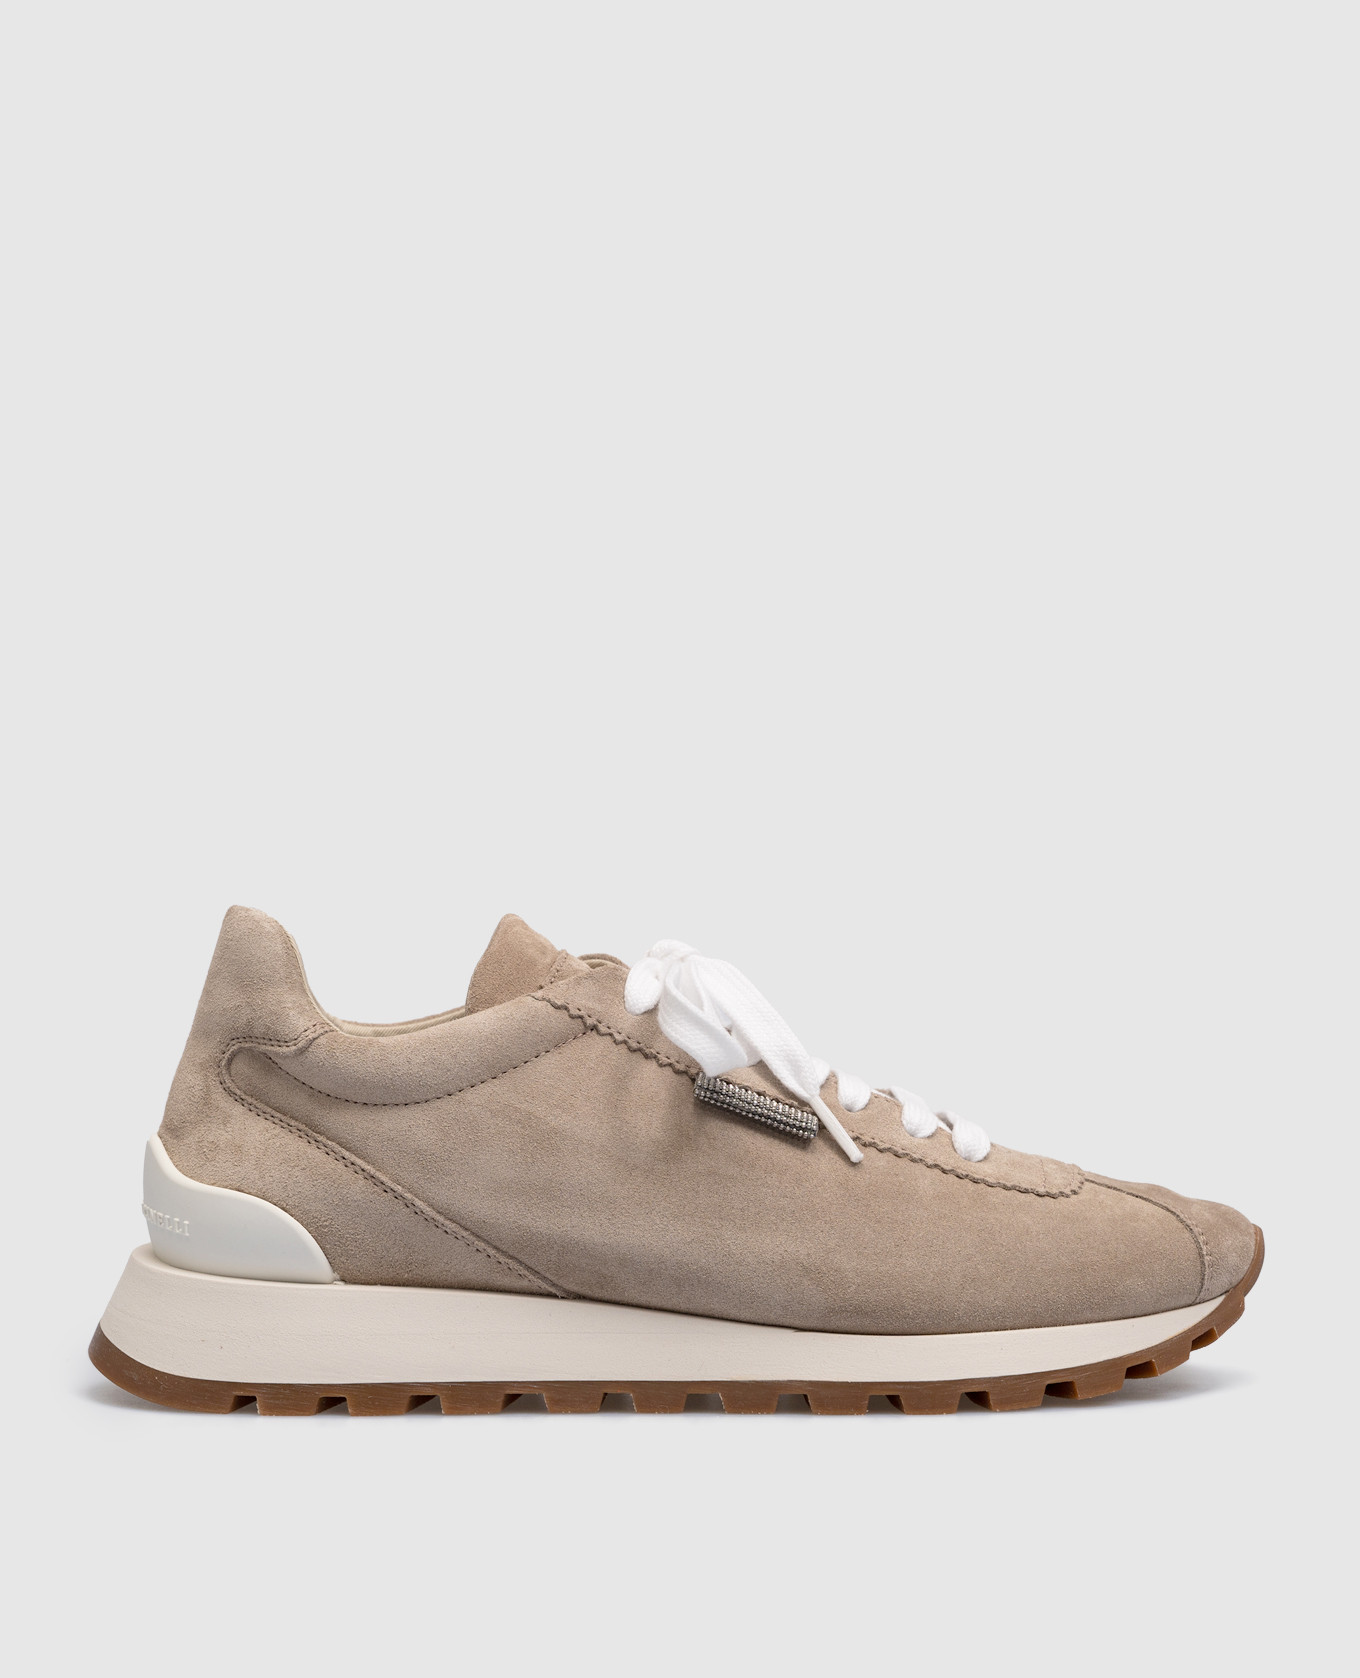 Beige suede sneakers with logo